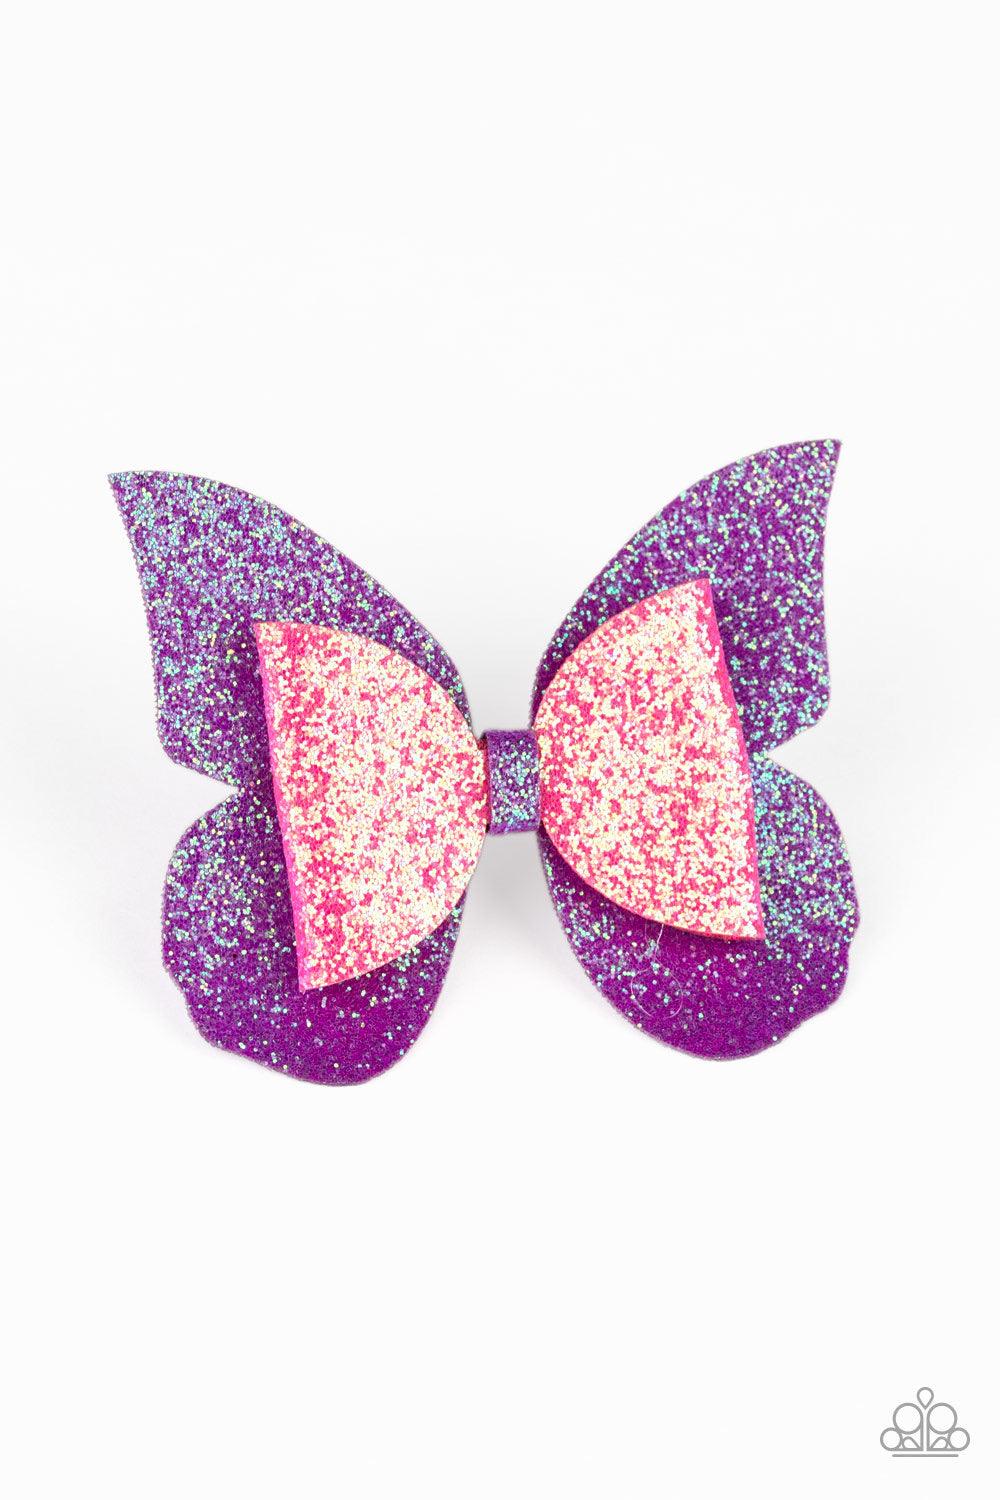 Paparazzi Accessories Butterfly Bouquet - Purple Dusted in sparkle, glittery pink and purple fabric delicately knots into a butterfly-shaped bow. Features a standard hair clip on the back. Jewelry